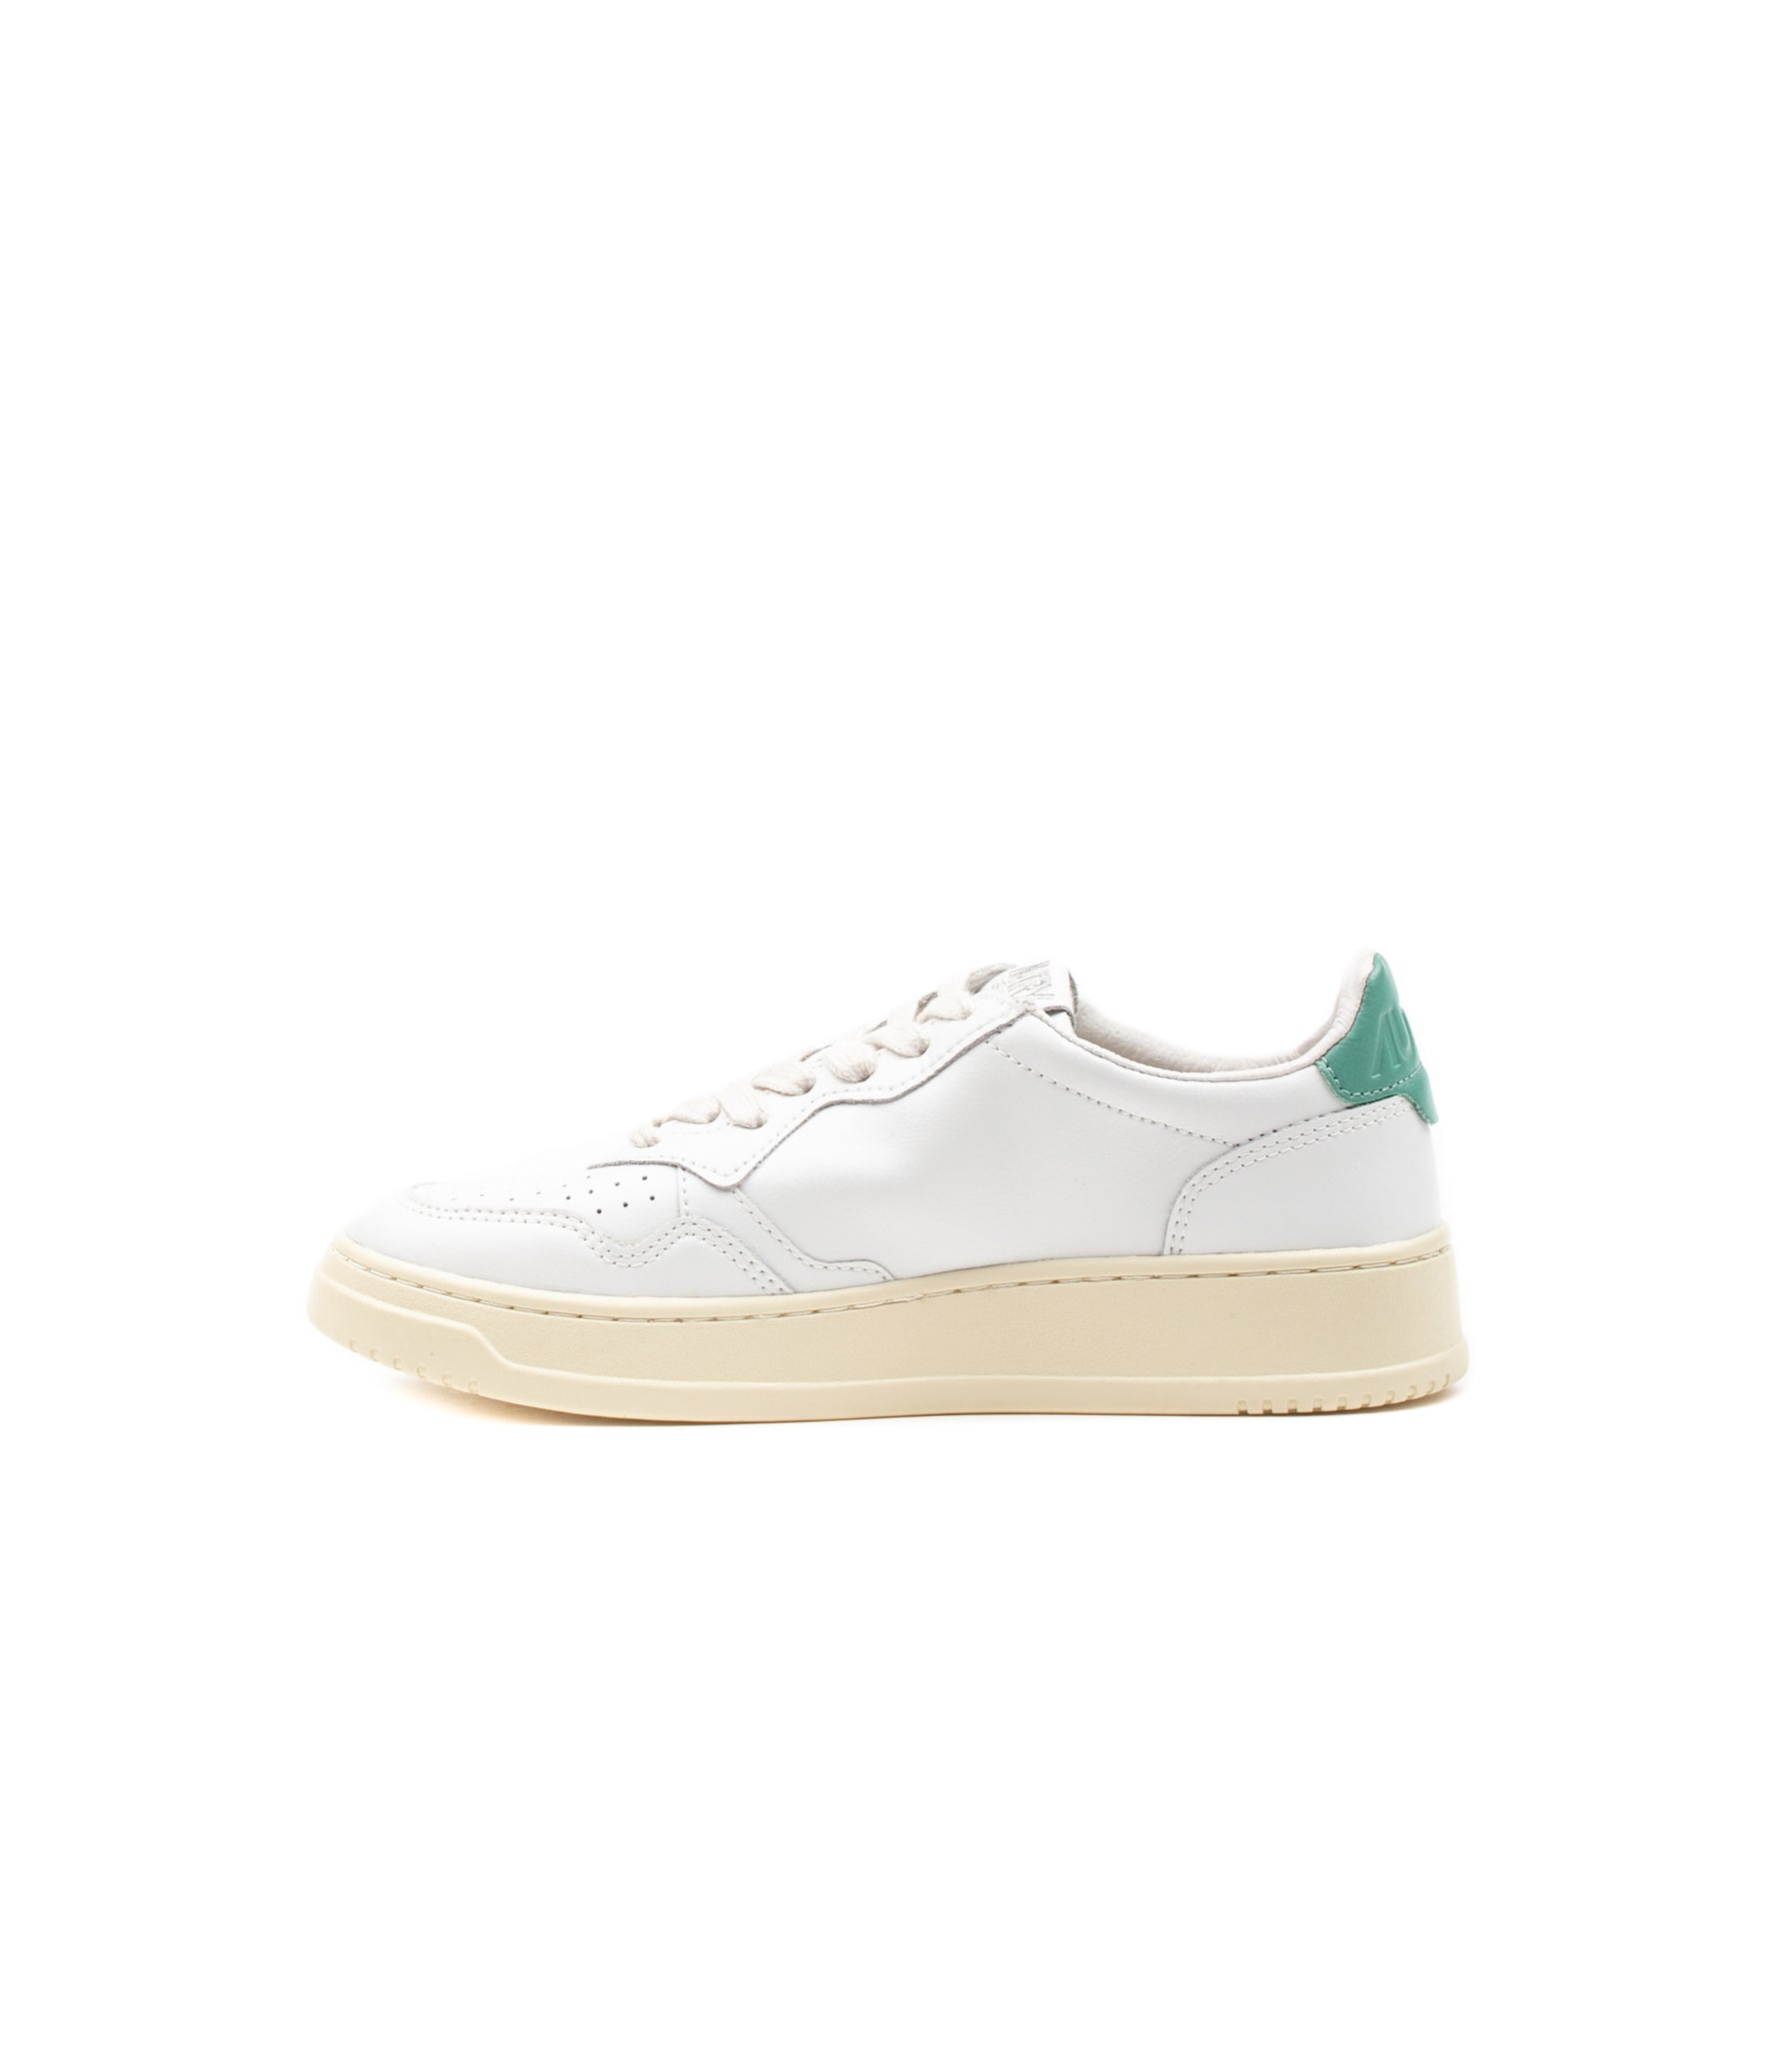 Autry Medalist Low Leat White Turquoise Womens